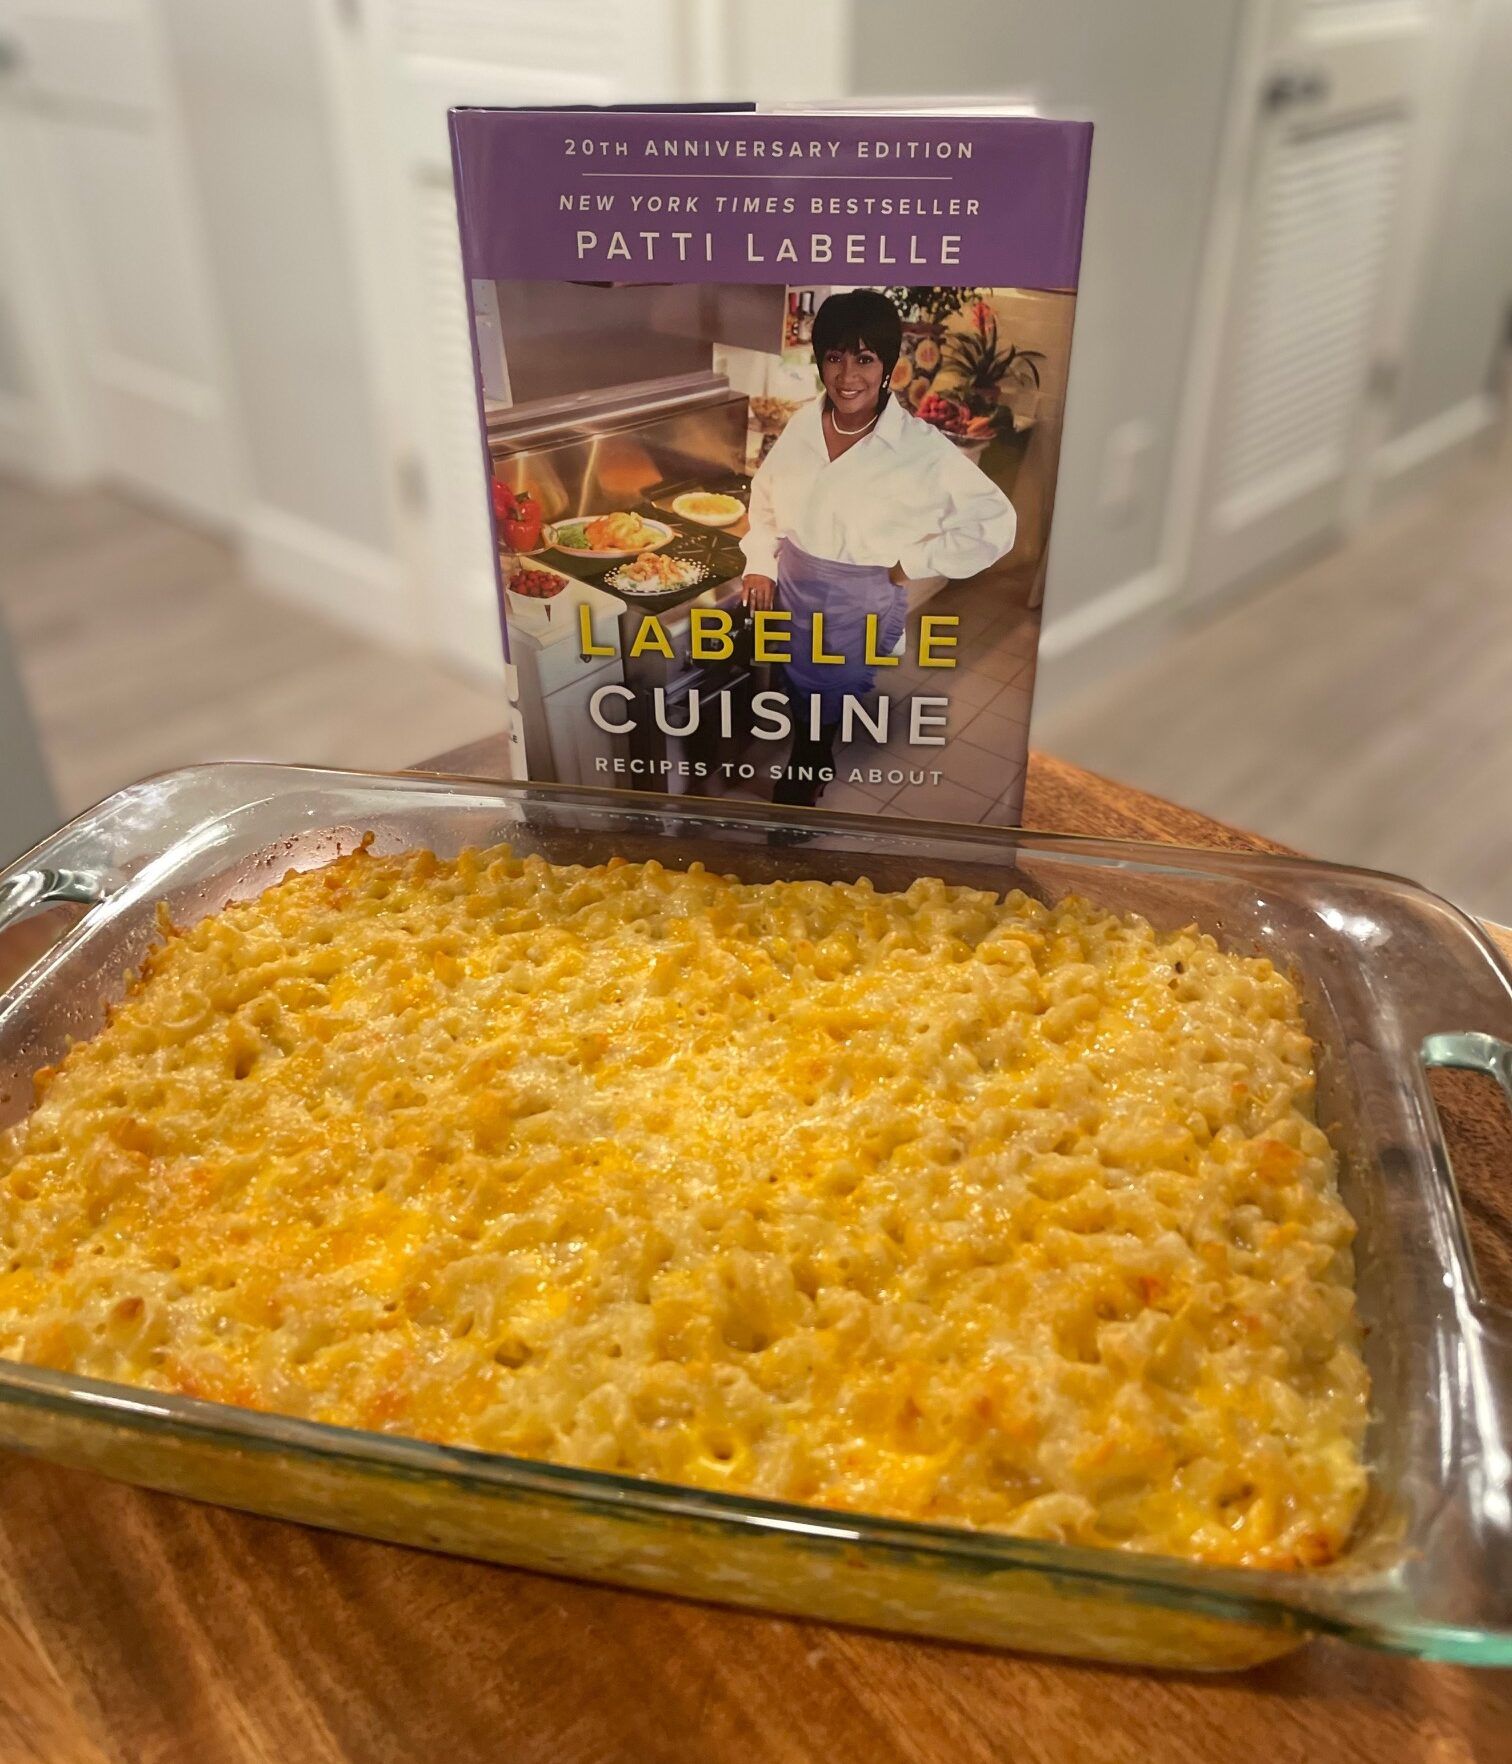 A glass casserole dish full of baked mac and cheese on a wooden table in front of the cookbook LaBelle Cuisine